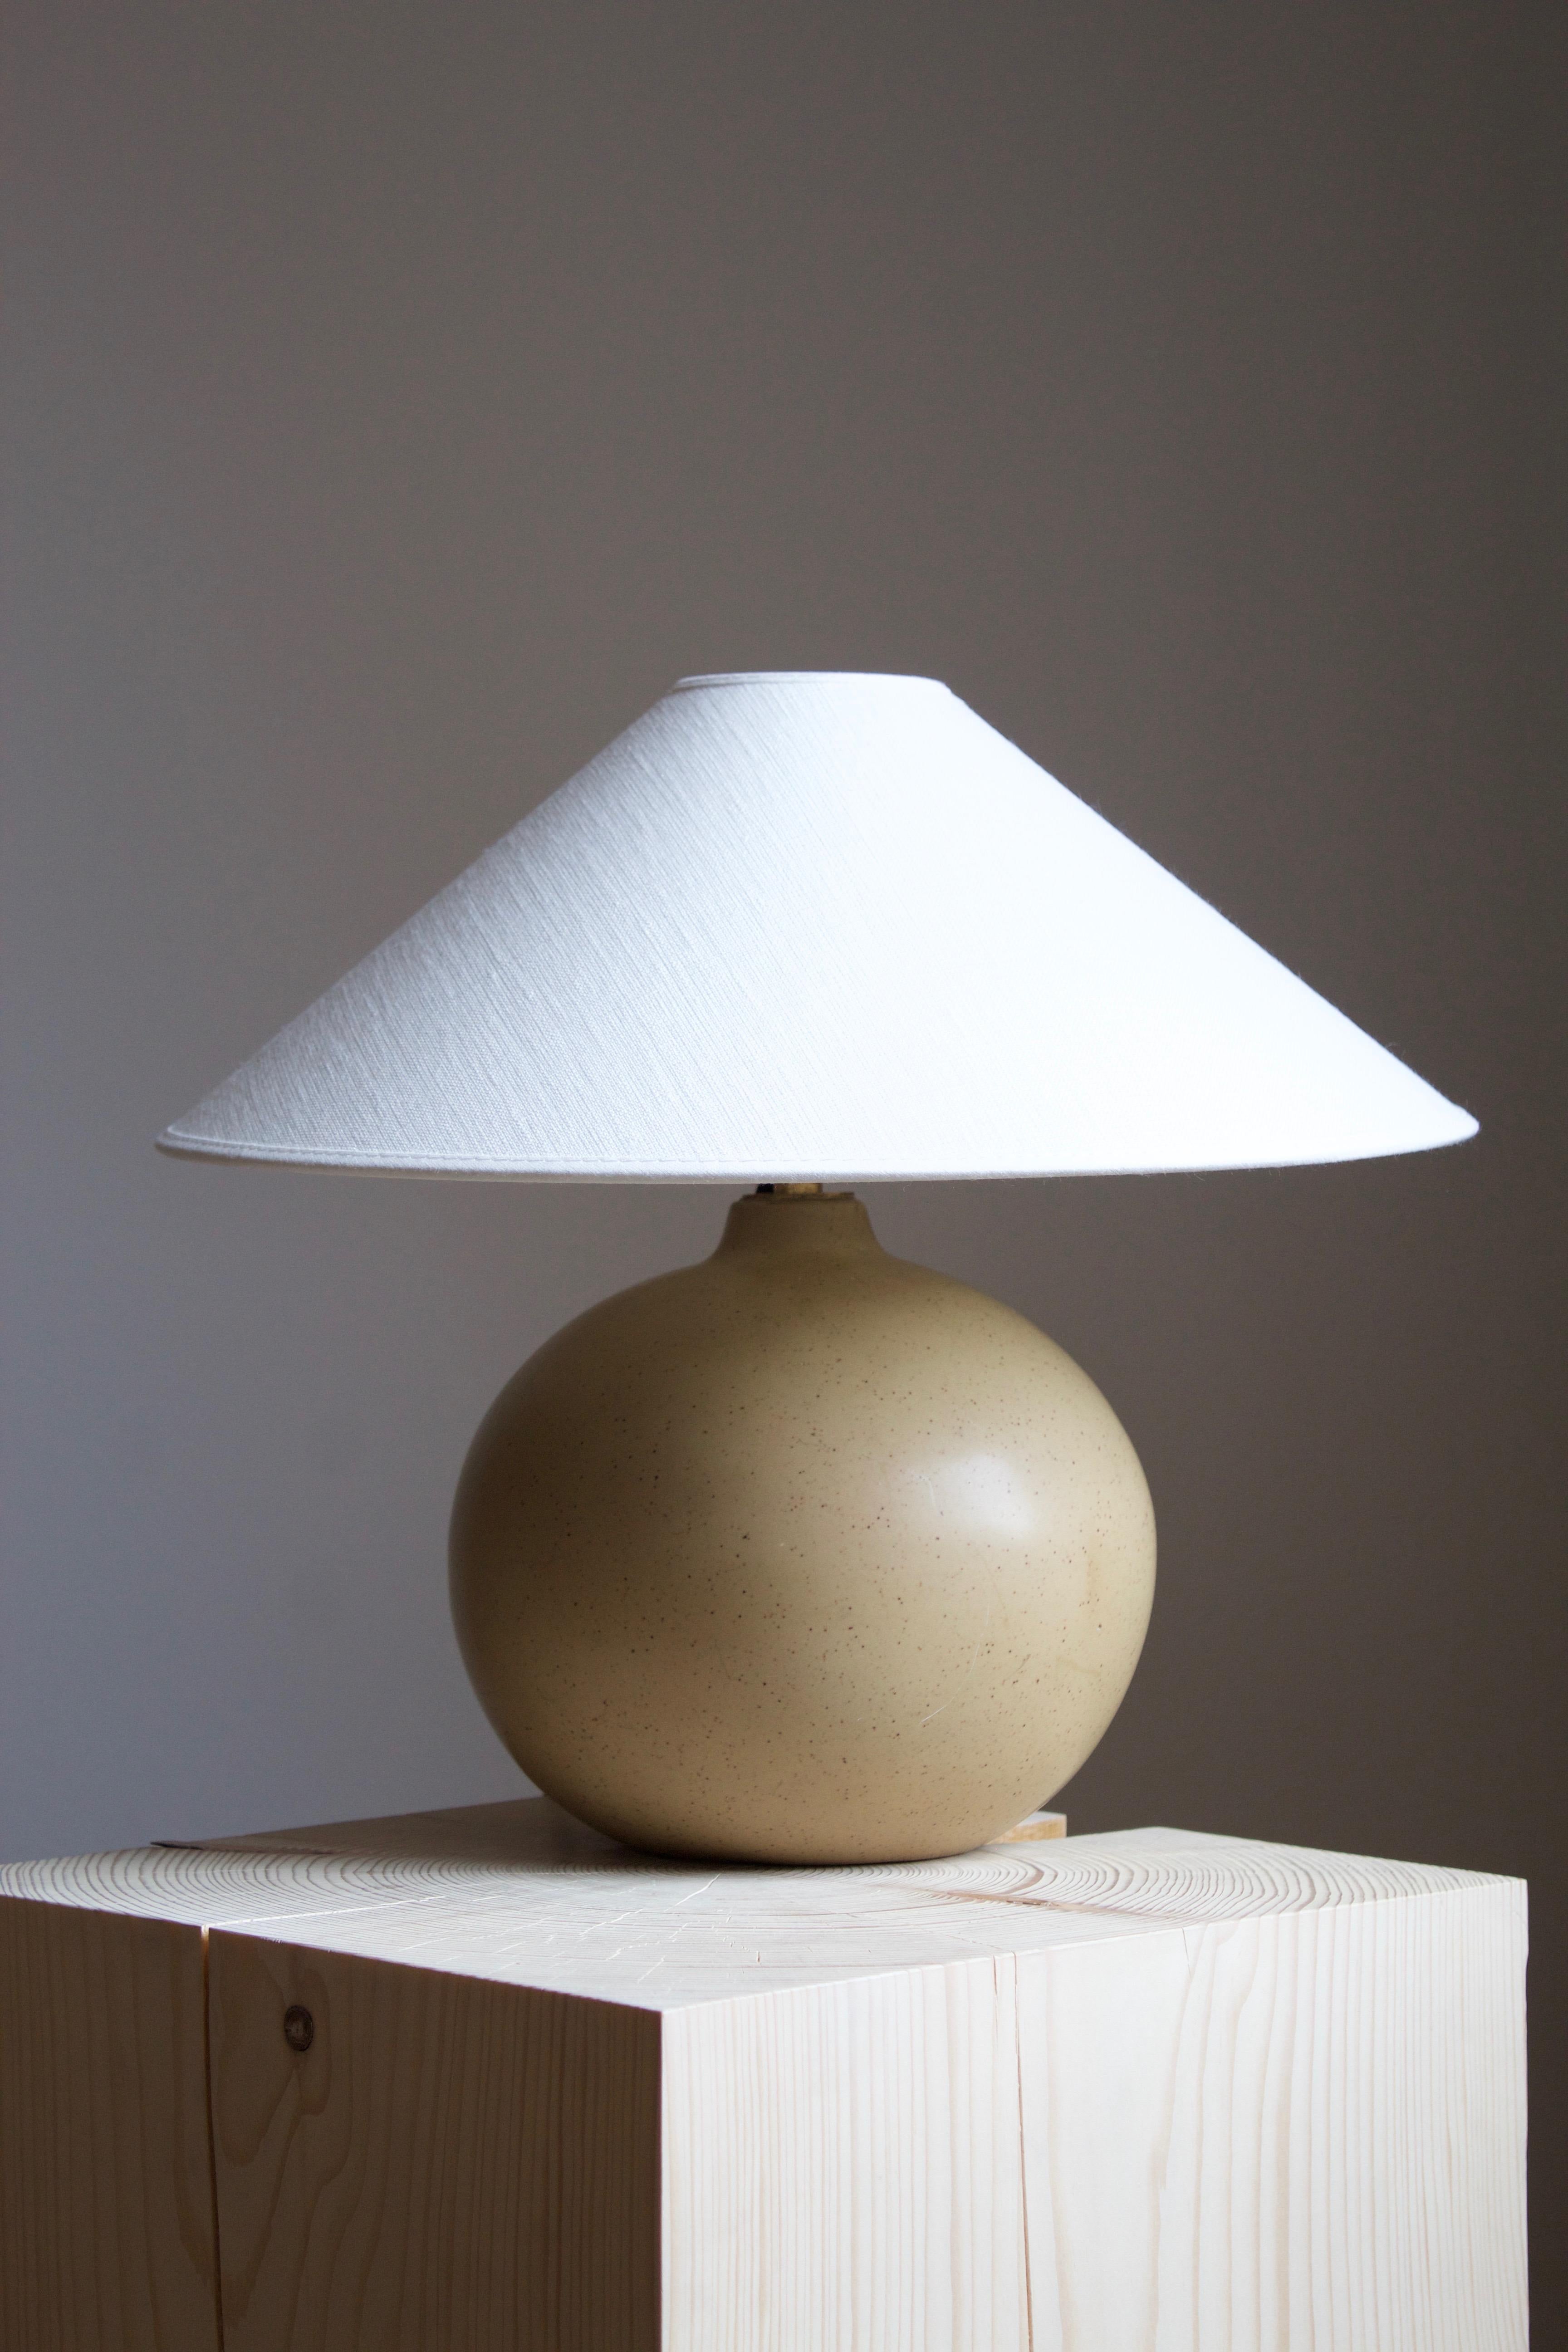 A table lamp, design and production attributed to Gustavsberg, Sweden, 1950s. Unmarked.

Stated dimensions exclude lampshade, height include socket. Sold without lampshade.